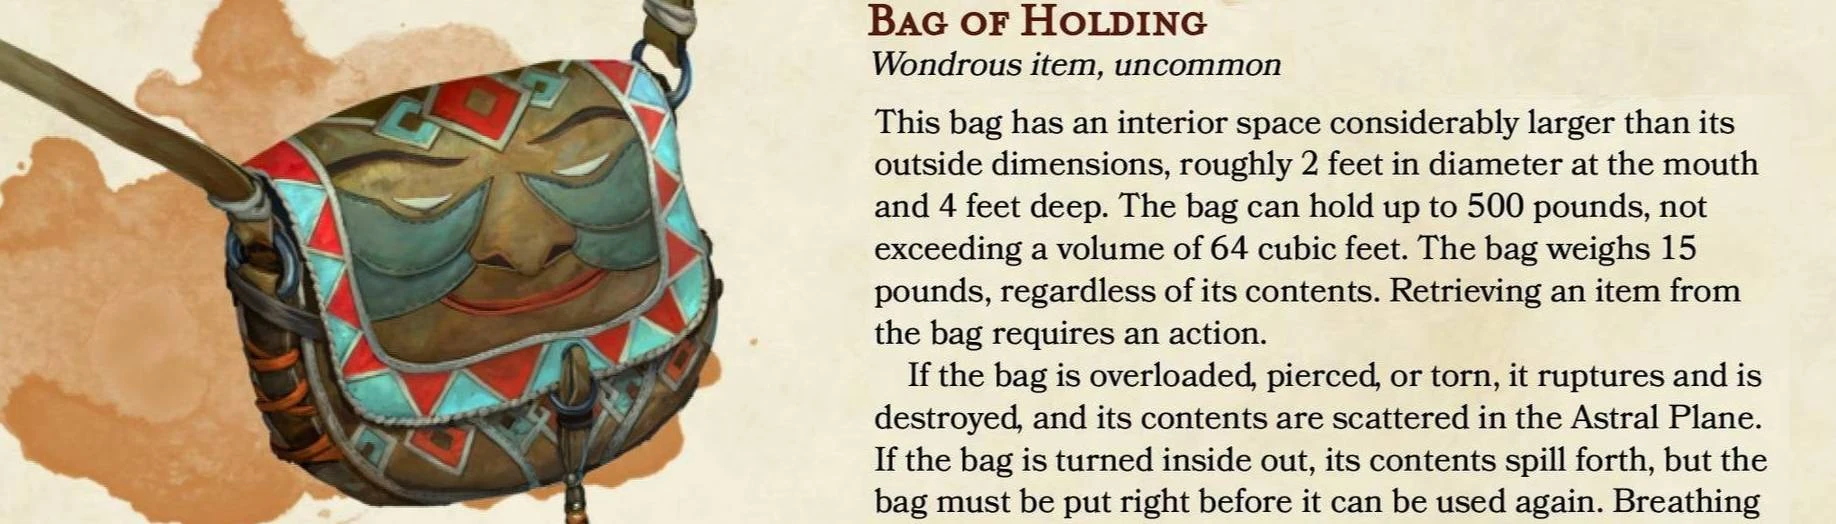 The Bag of Holding